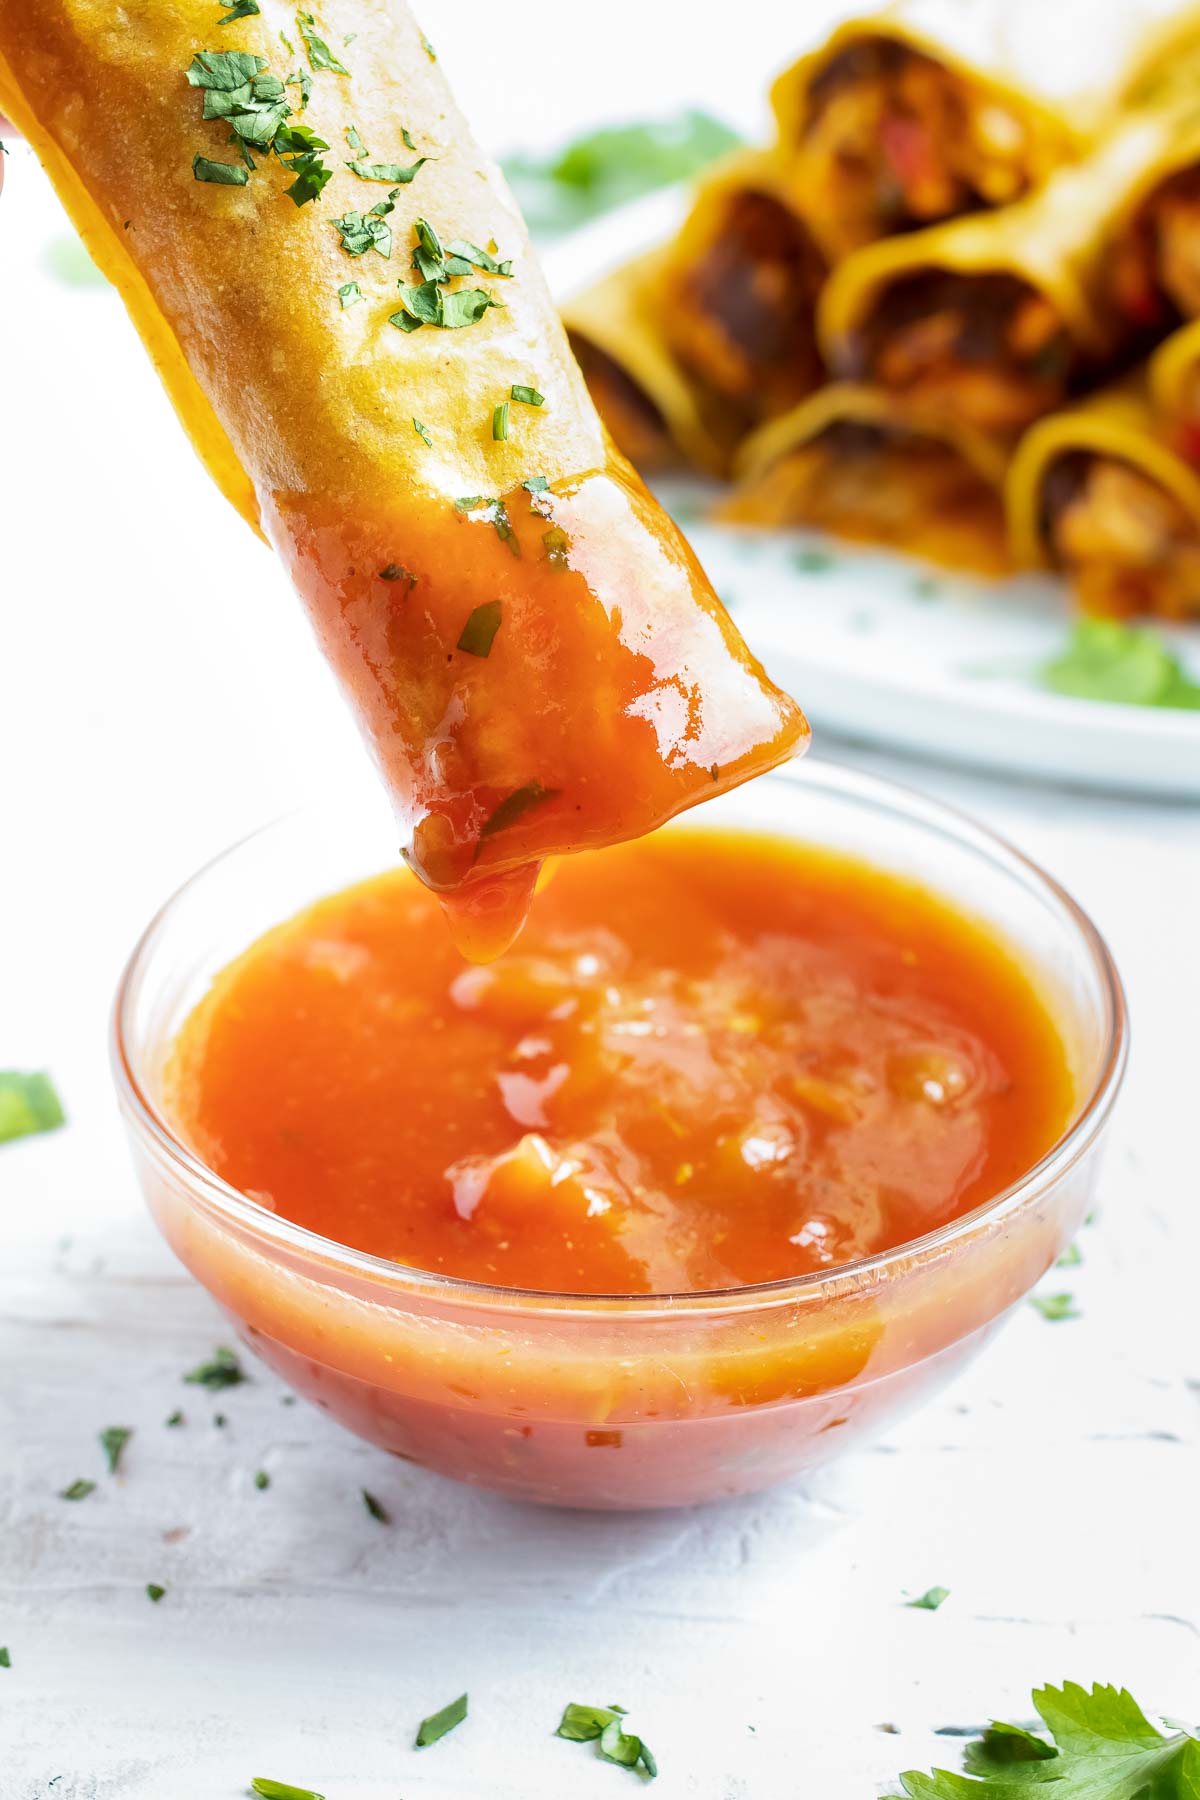 A baked chicken taquito being dipped into a glass bowl of salsa.